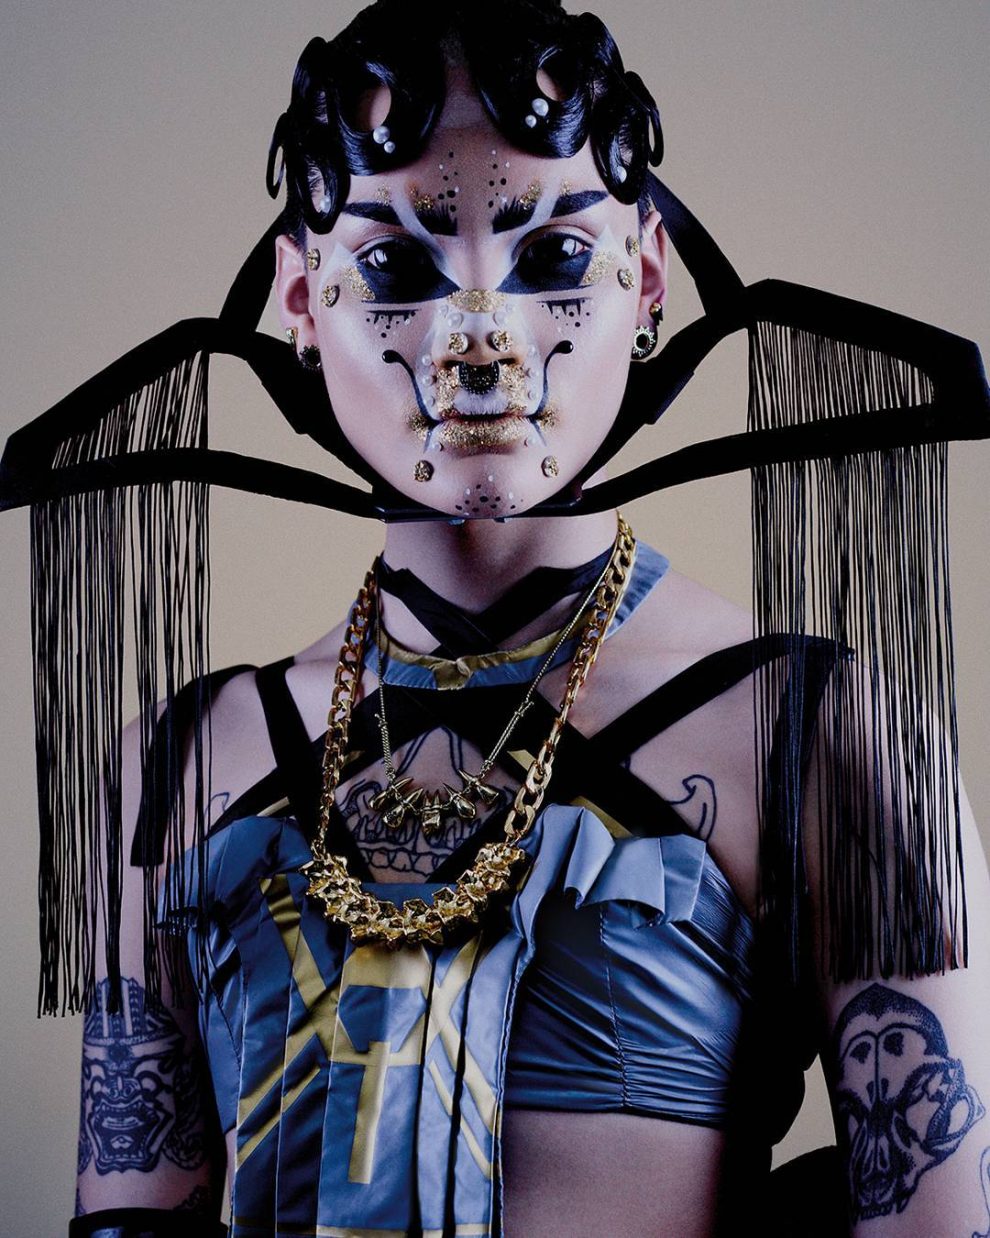 Meet Hungry, The Queen Of Distorted And Surreal Makeup » Design You Trust